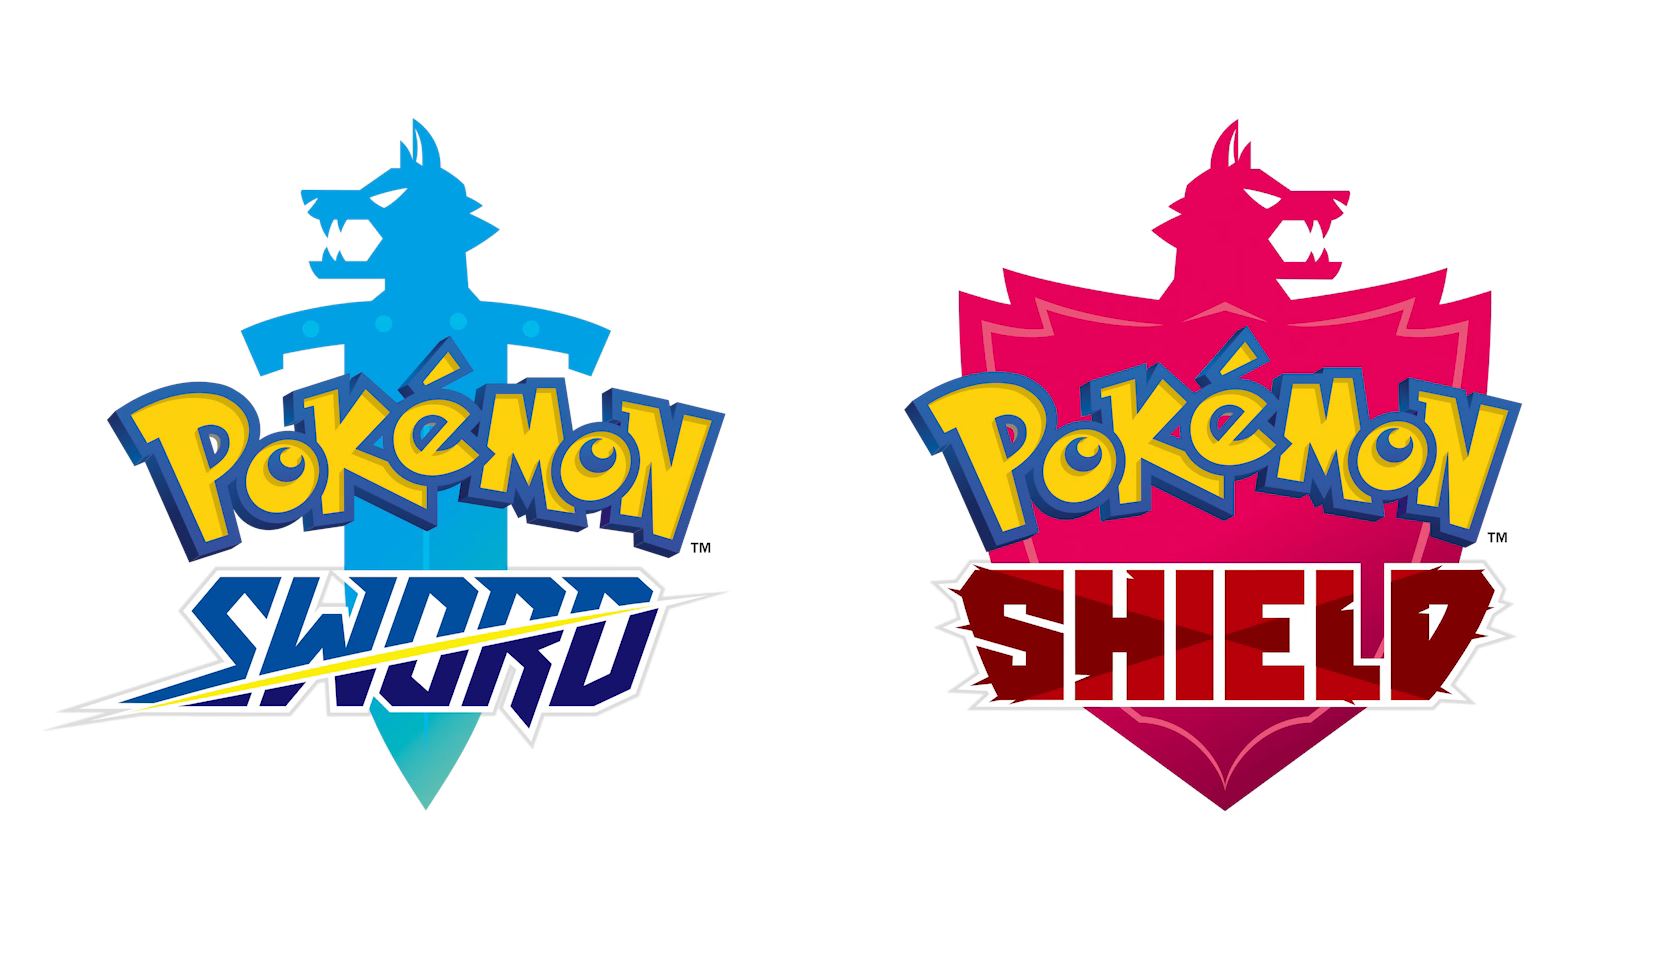 Pokemon Sword And Shield For Switch Announced Starters Region